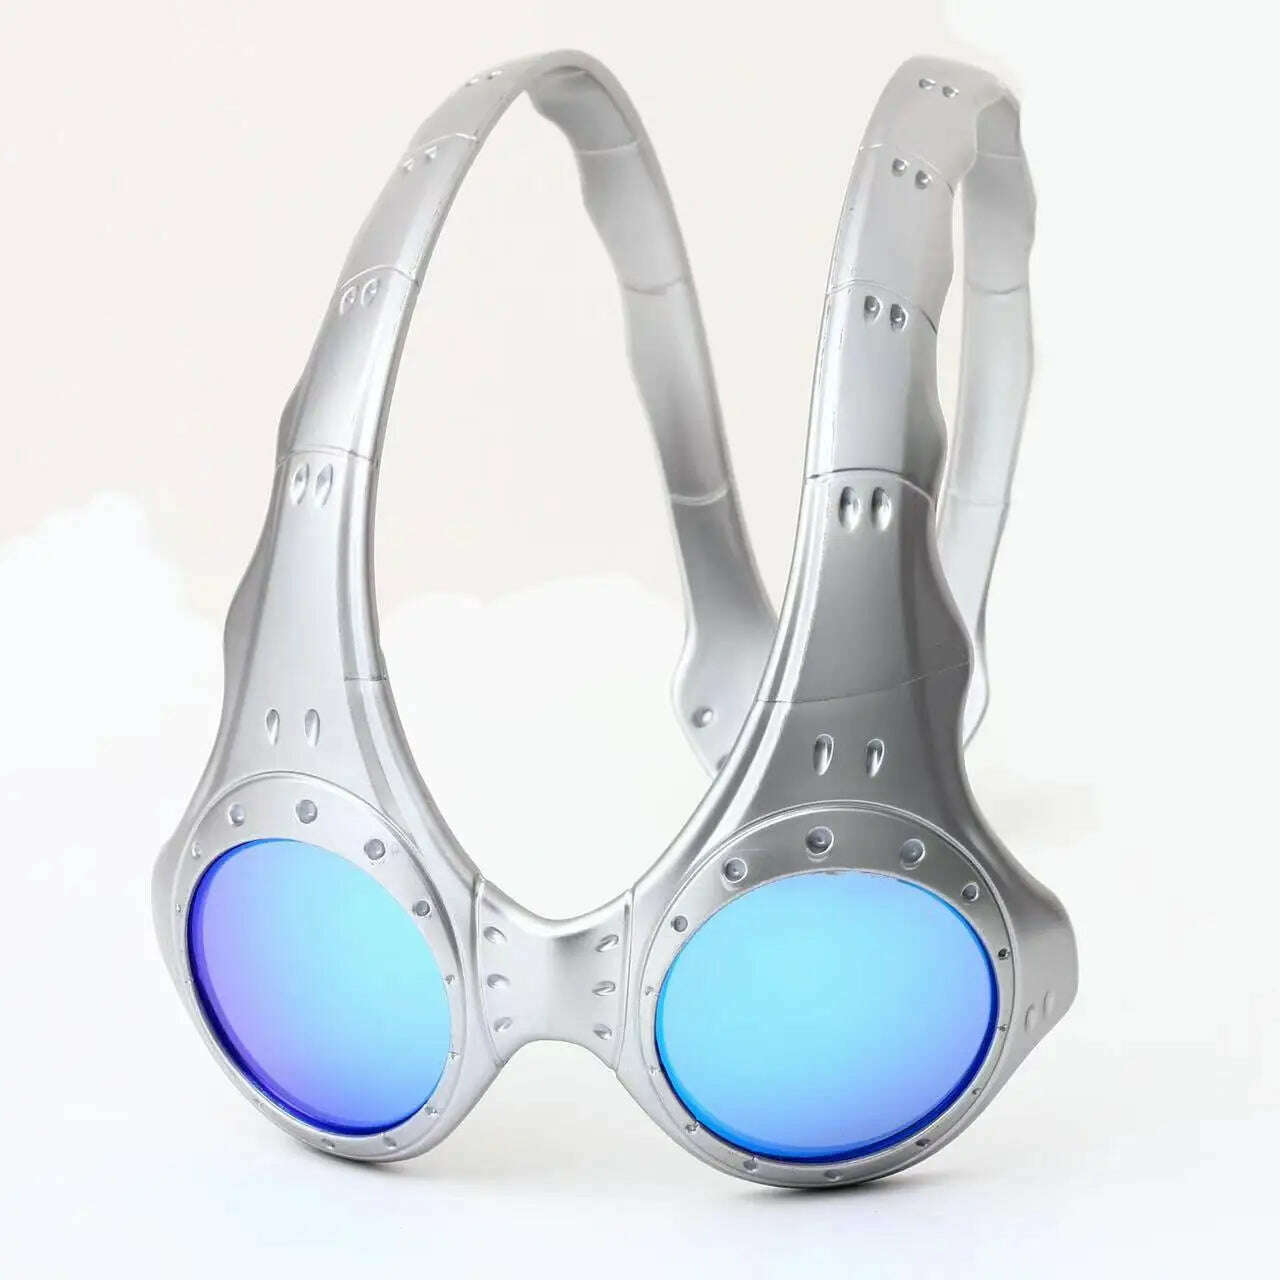 KIMLUD, New Opposite Sex Circular Men's And Women's Technological Sunglasses Trend Men's Y2K Ppersonalized Driving Mirror Alien Goggles, Blue / UV400, KIMLUD Womens Clothes